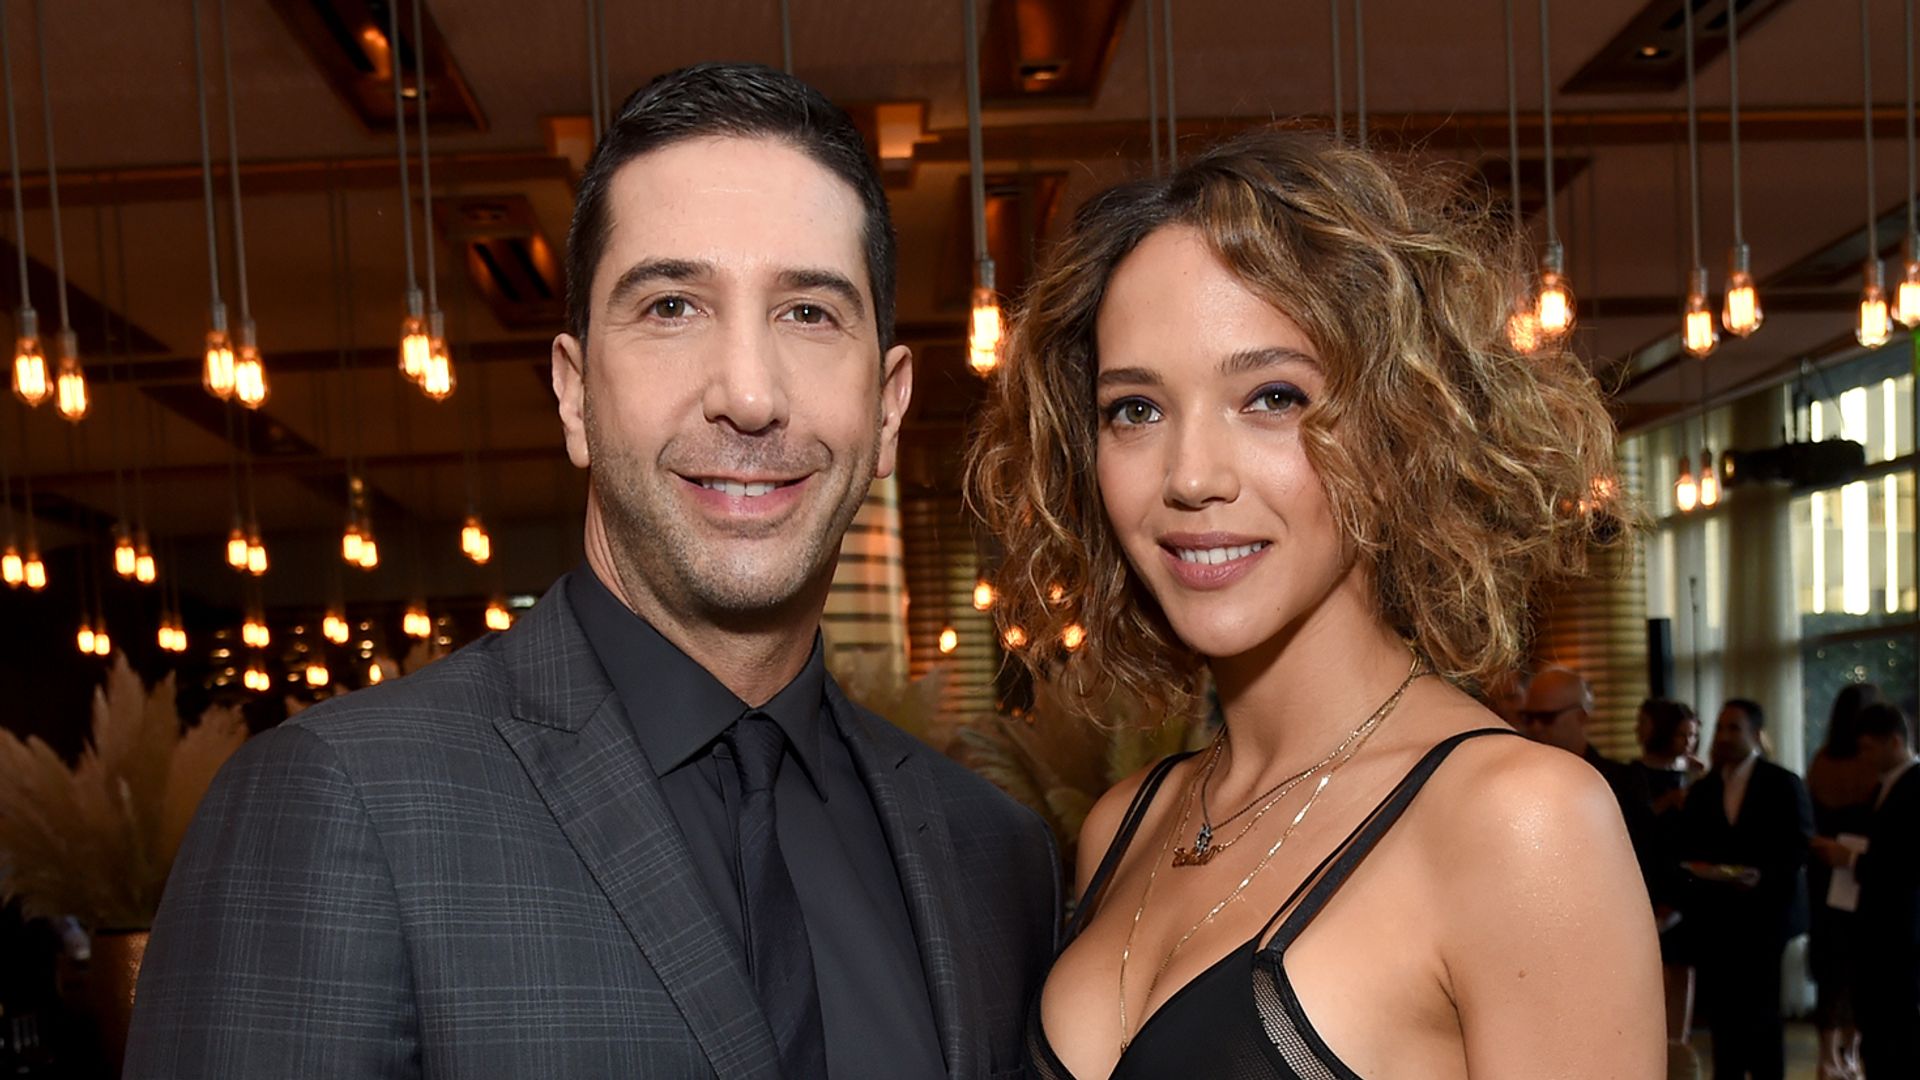 David Schwimmer and Zoe Buckman at Vanity Fair And FX's Annual Primetime Emmy Nominations Party on September 17, 2016 in Beverly Hills, California